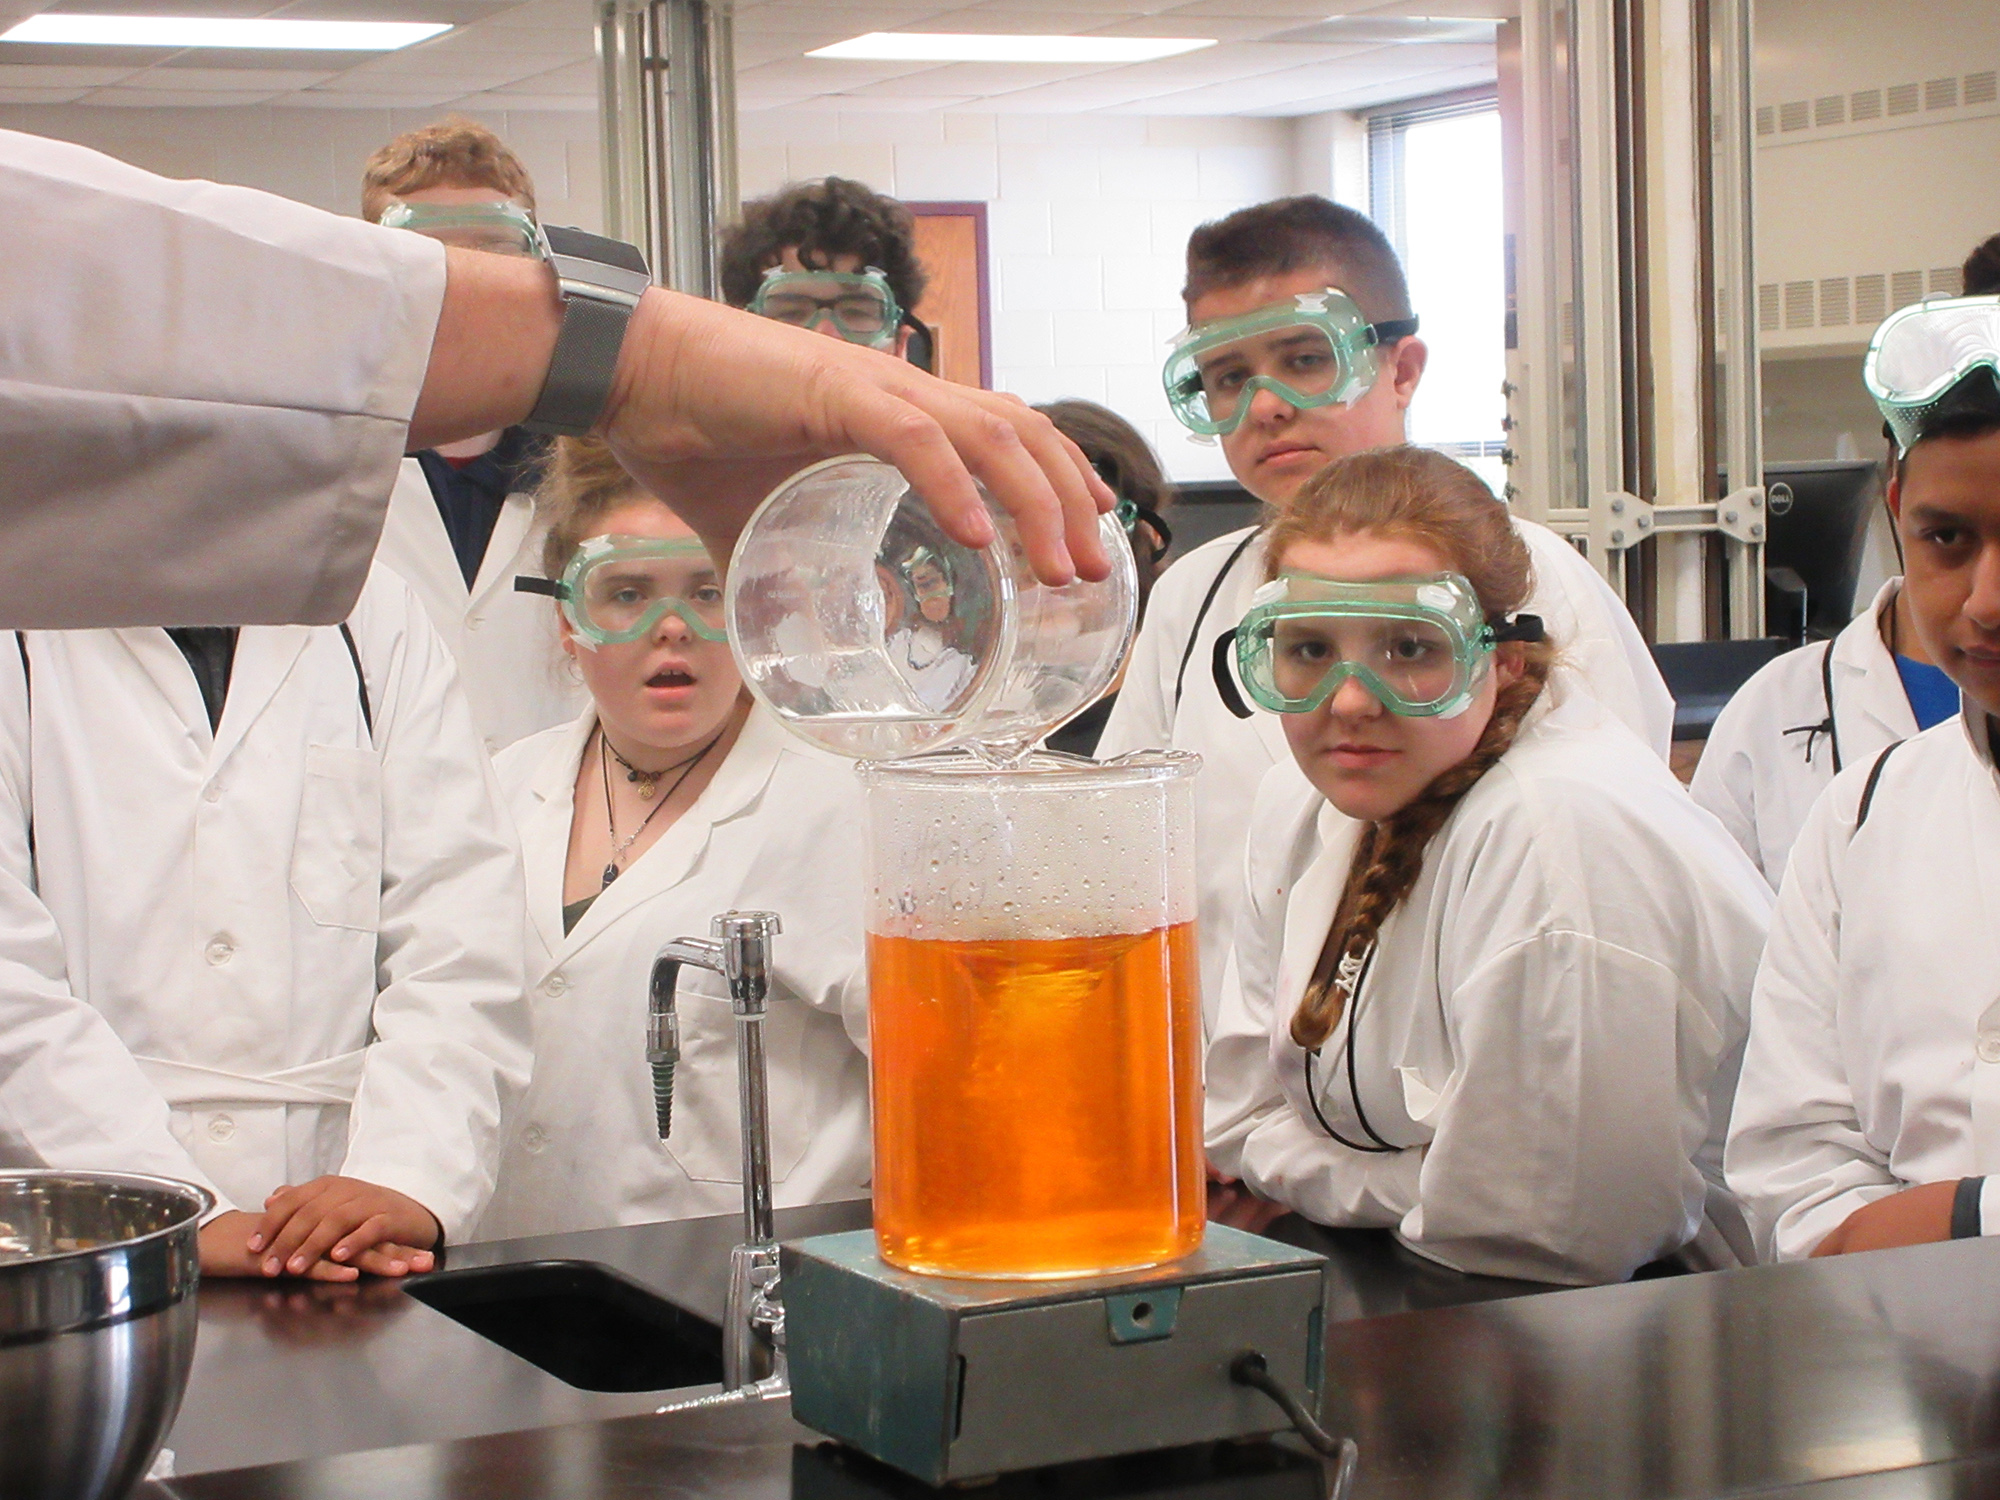 Kansas Academy of Math and Science camp participants observe science experiments at the 2019 summer camp.